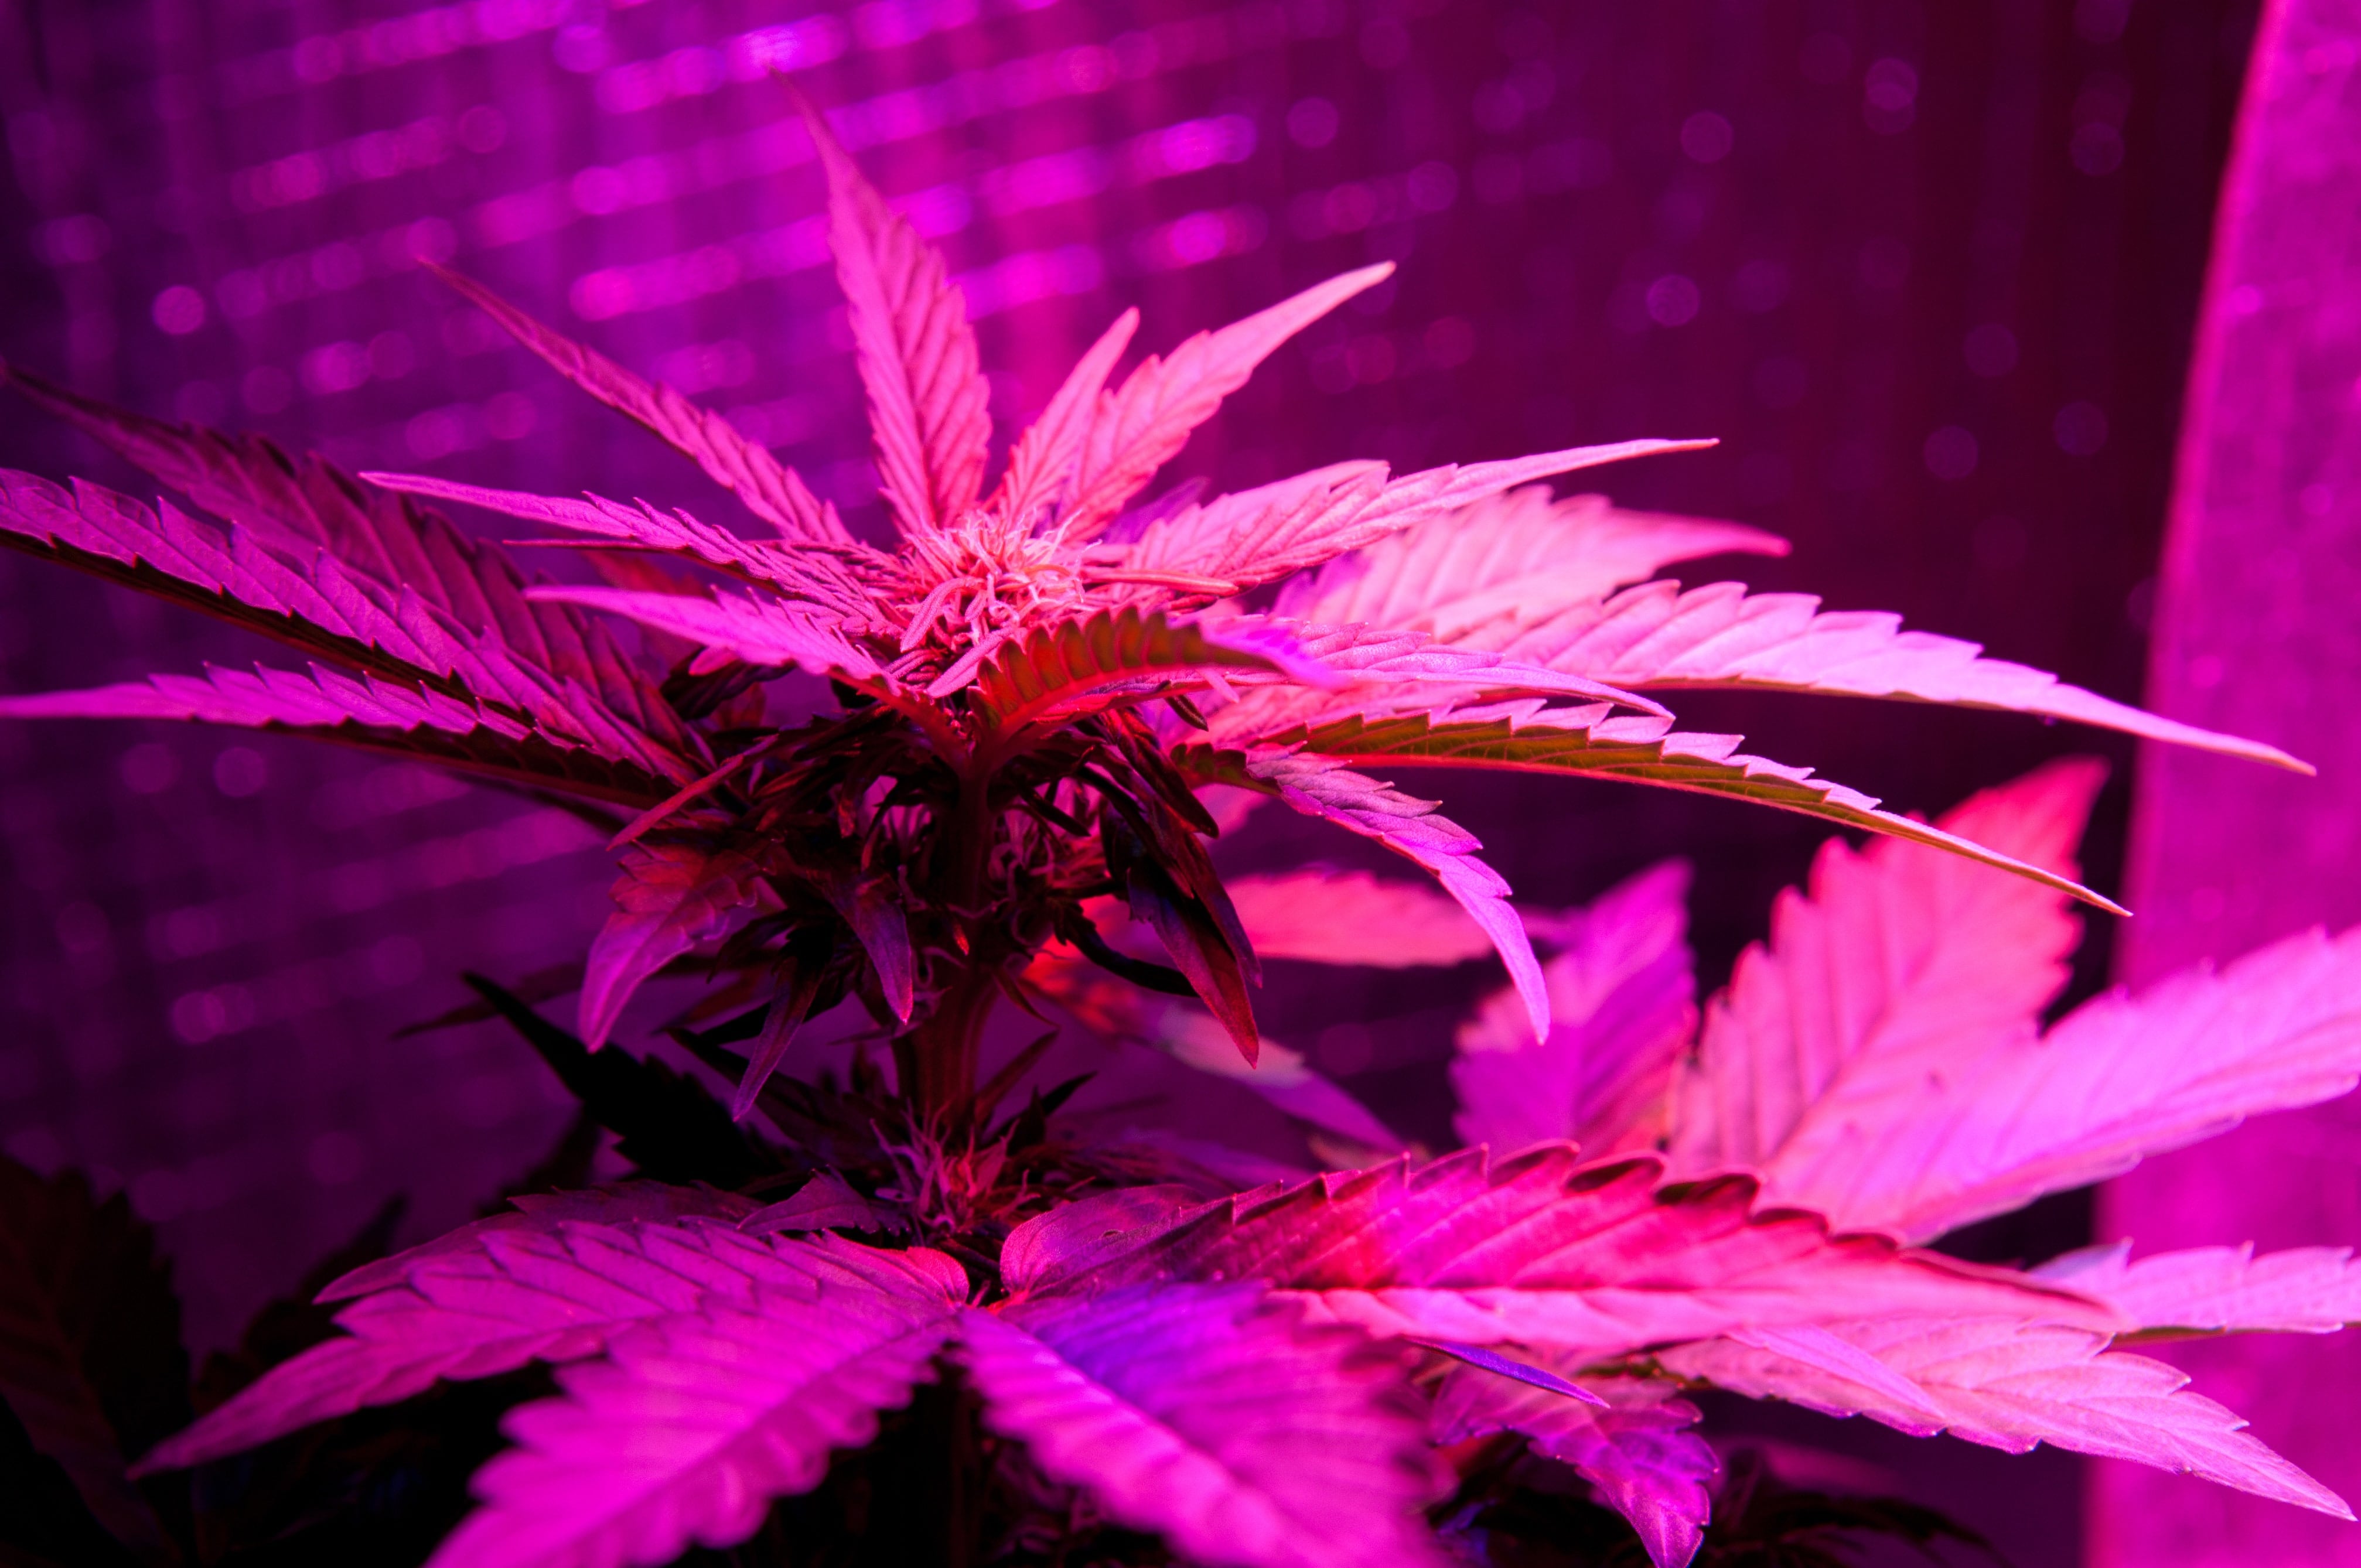 The 10 Things You Need to Know About How to Grow Weed